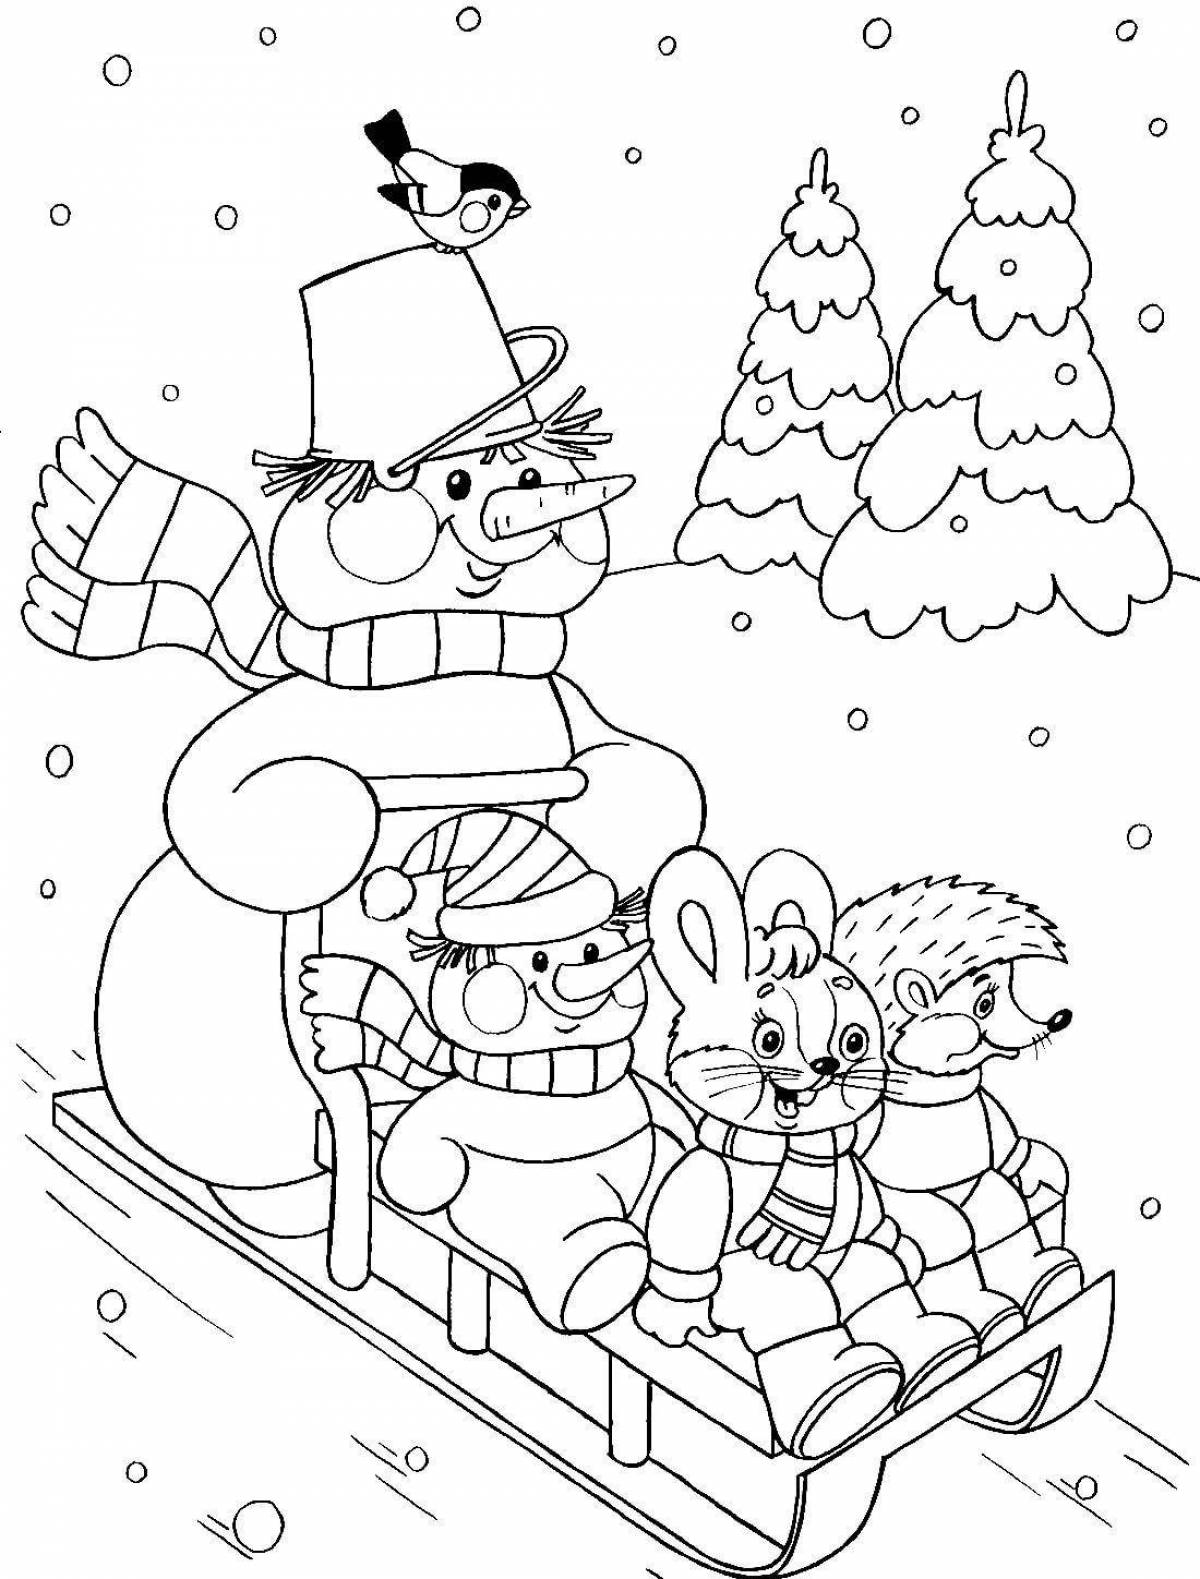 Energetic winter coloring book for children 6-7 years old